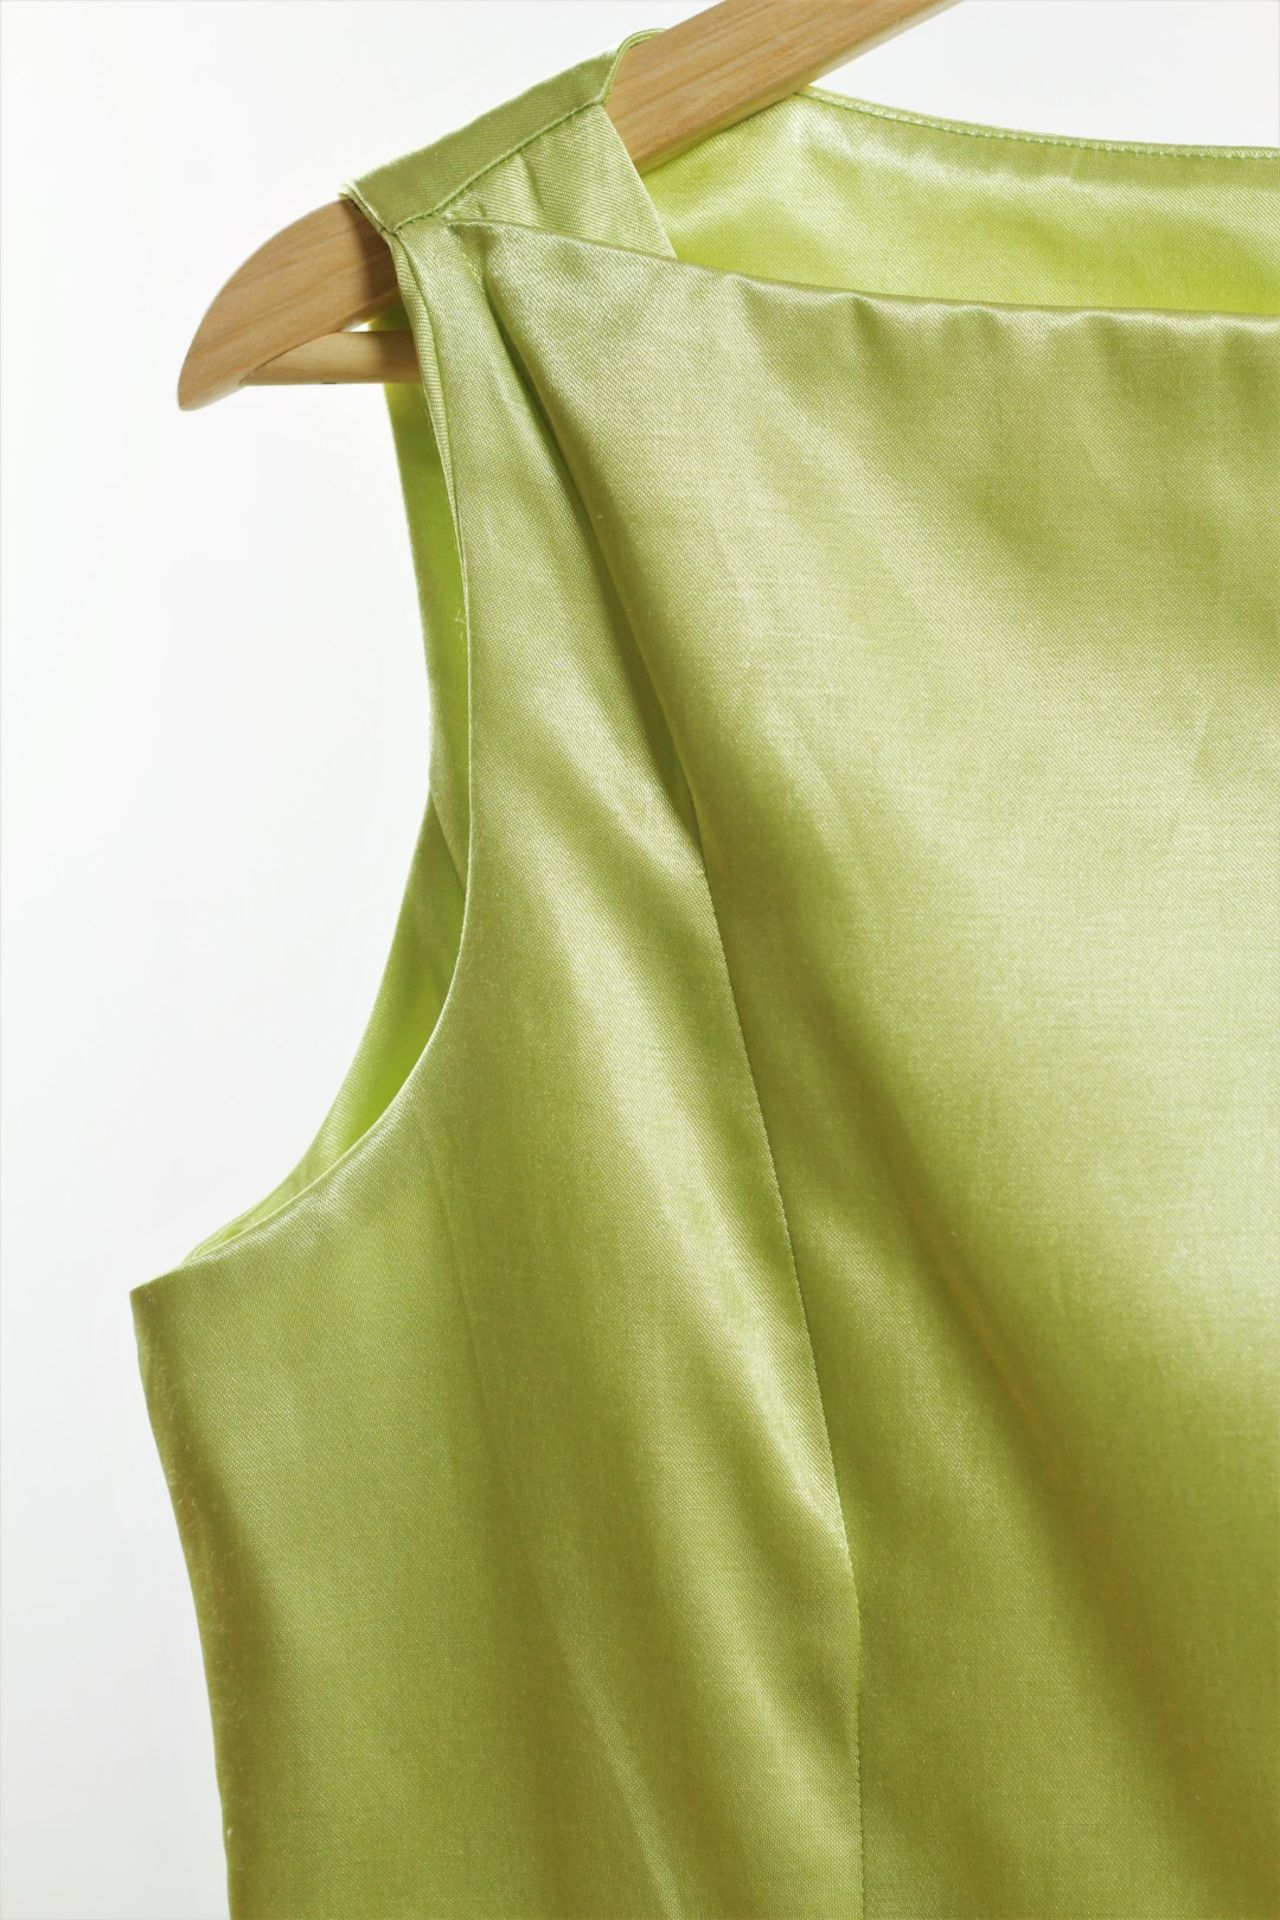 1 x Boutique Le Duc Lime Green Vest - From a High End Clothing Boutique In The - Image 8 of 9